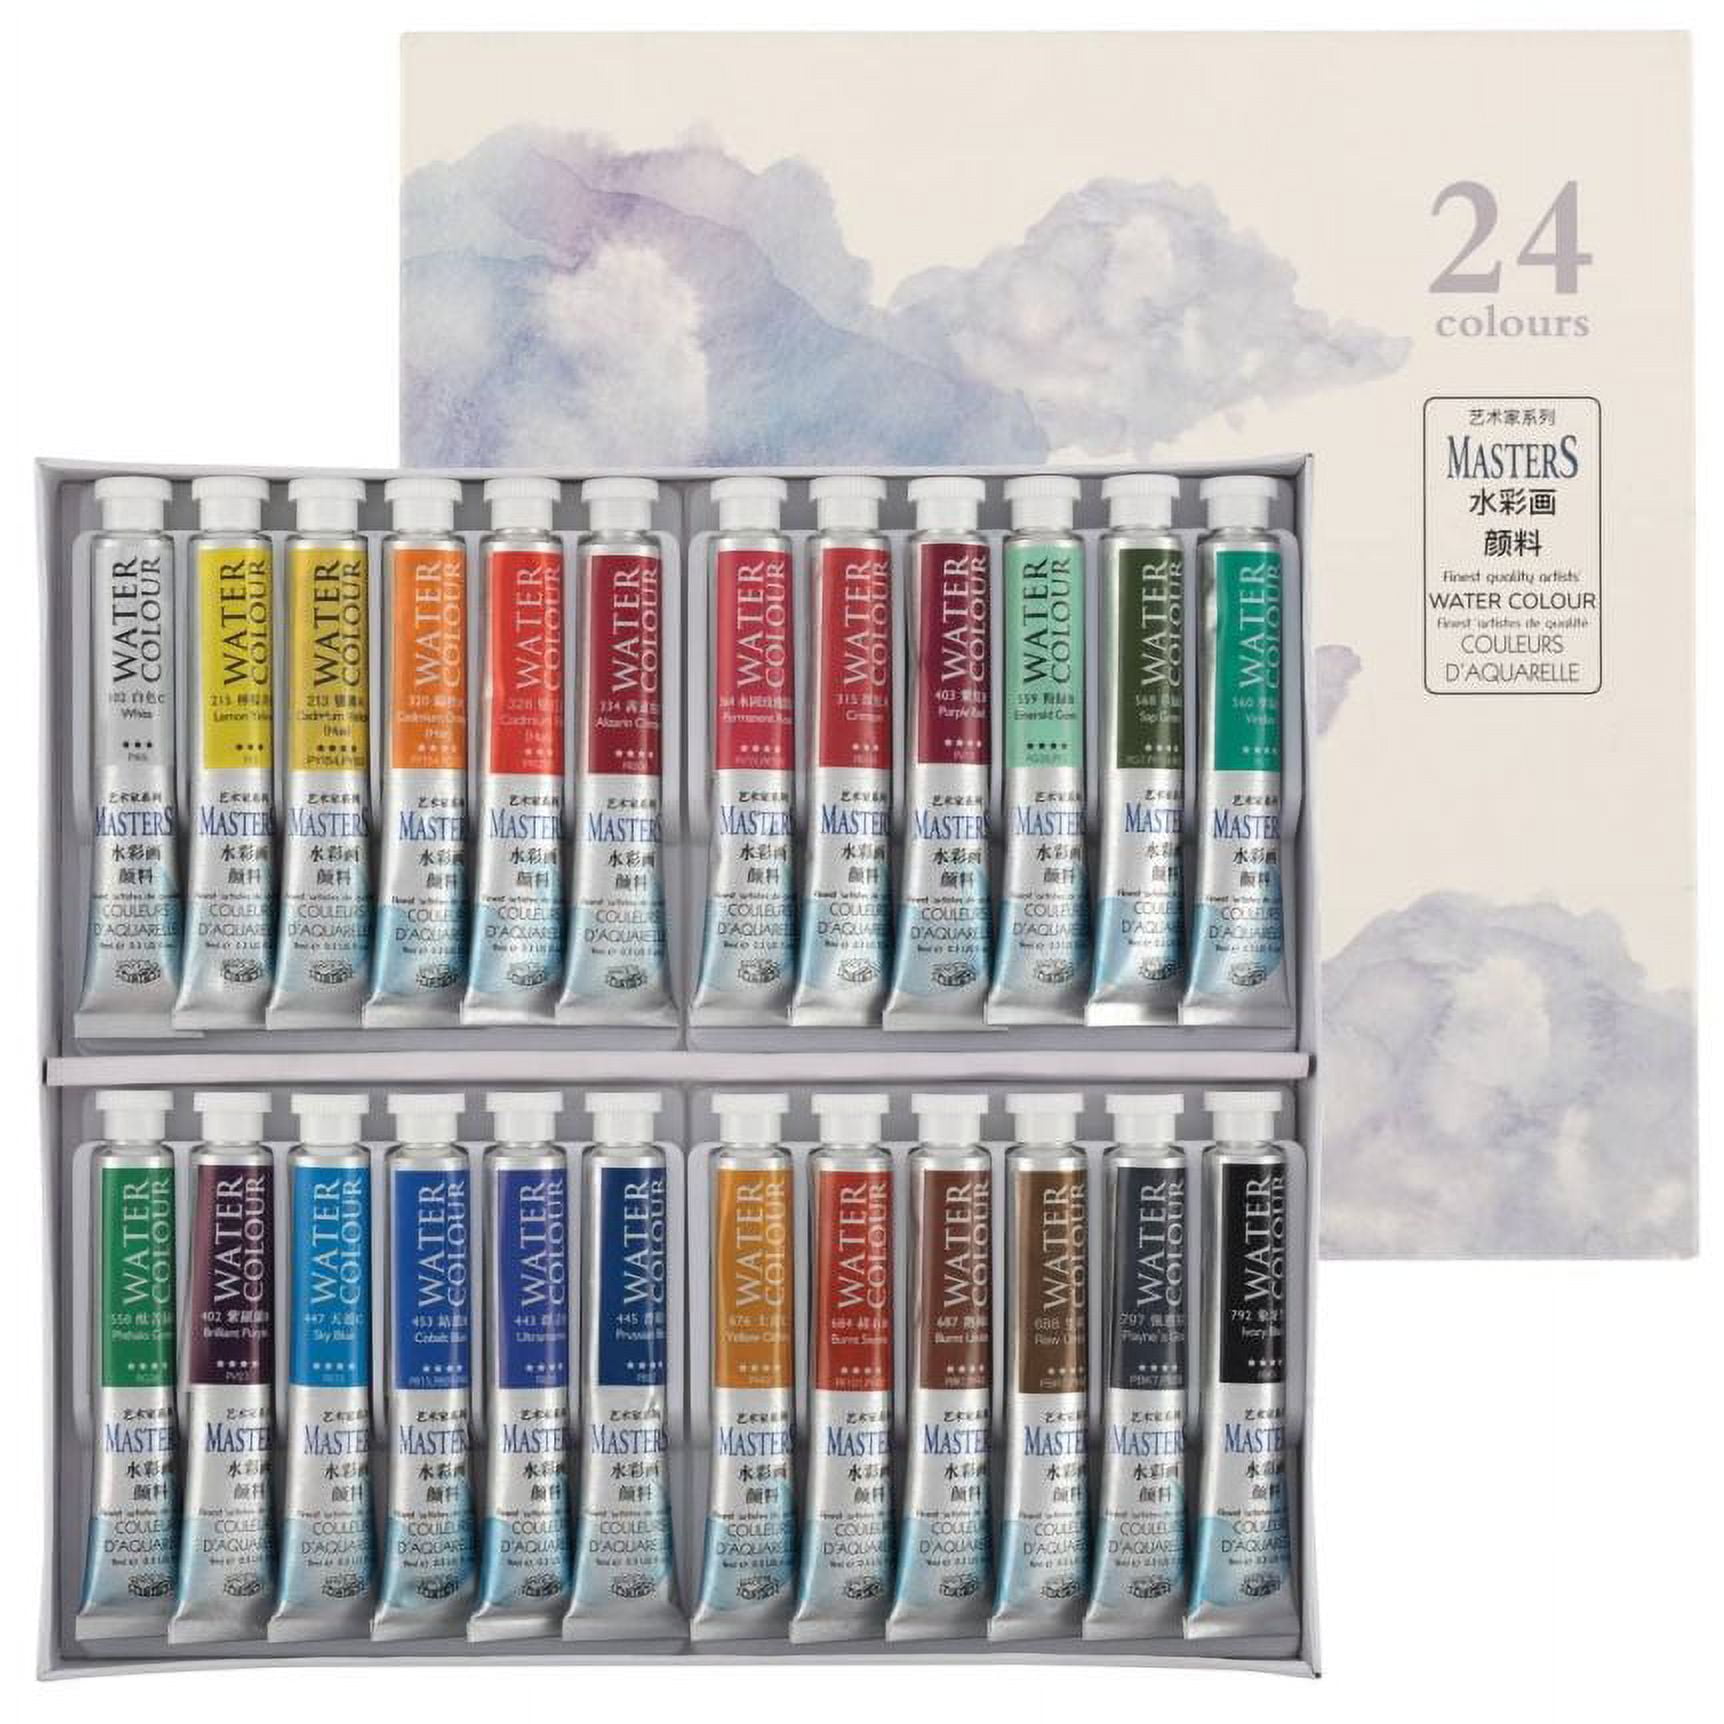 Marie's Watercolor Paint Set - Concentrated Color, Pure Pigments, High  Lightfastness Ratings Craft Paint for Artists - Set of 24 Assorted Colors  (9 mL/0.3 oz) 